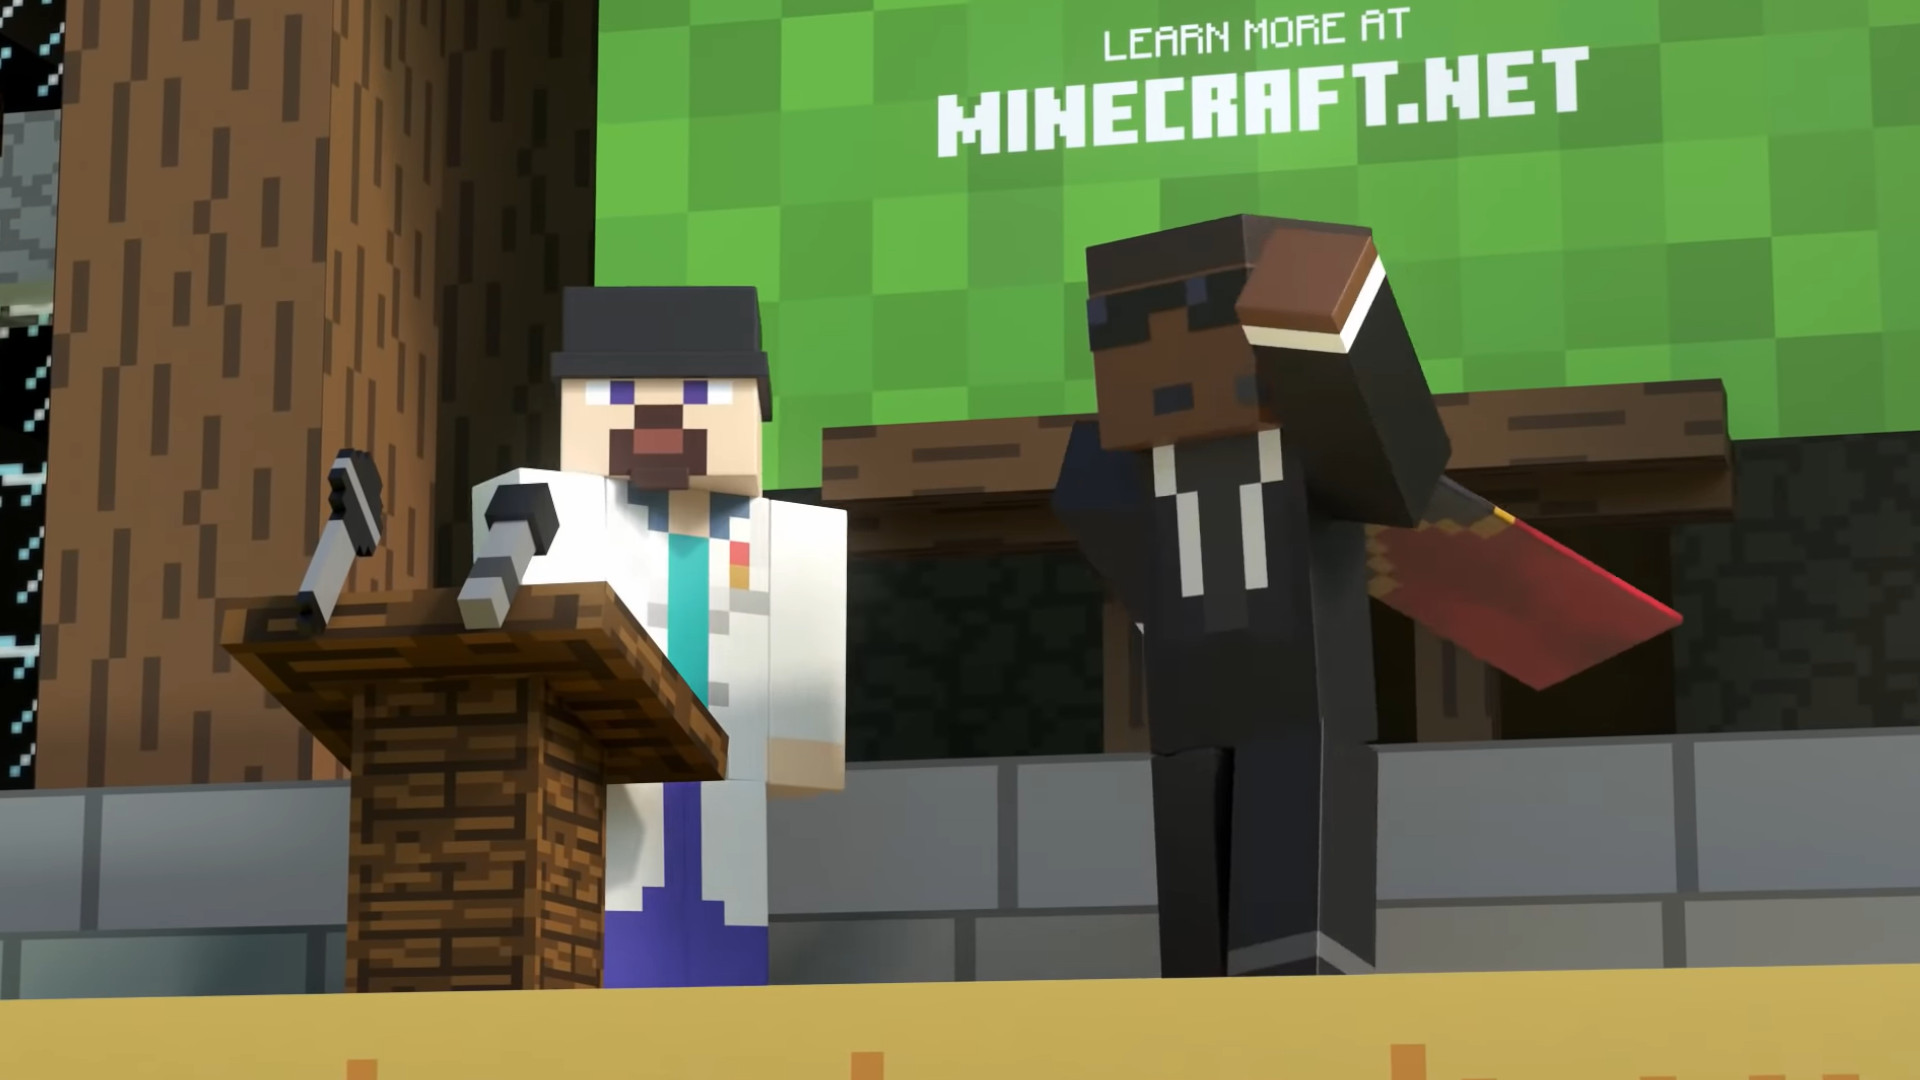 Minecraft Java Edition : Get Your Free Cape & Account Migration! 